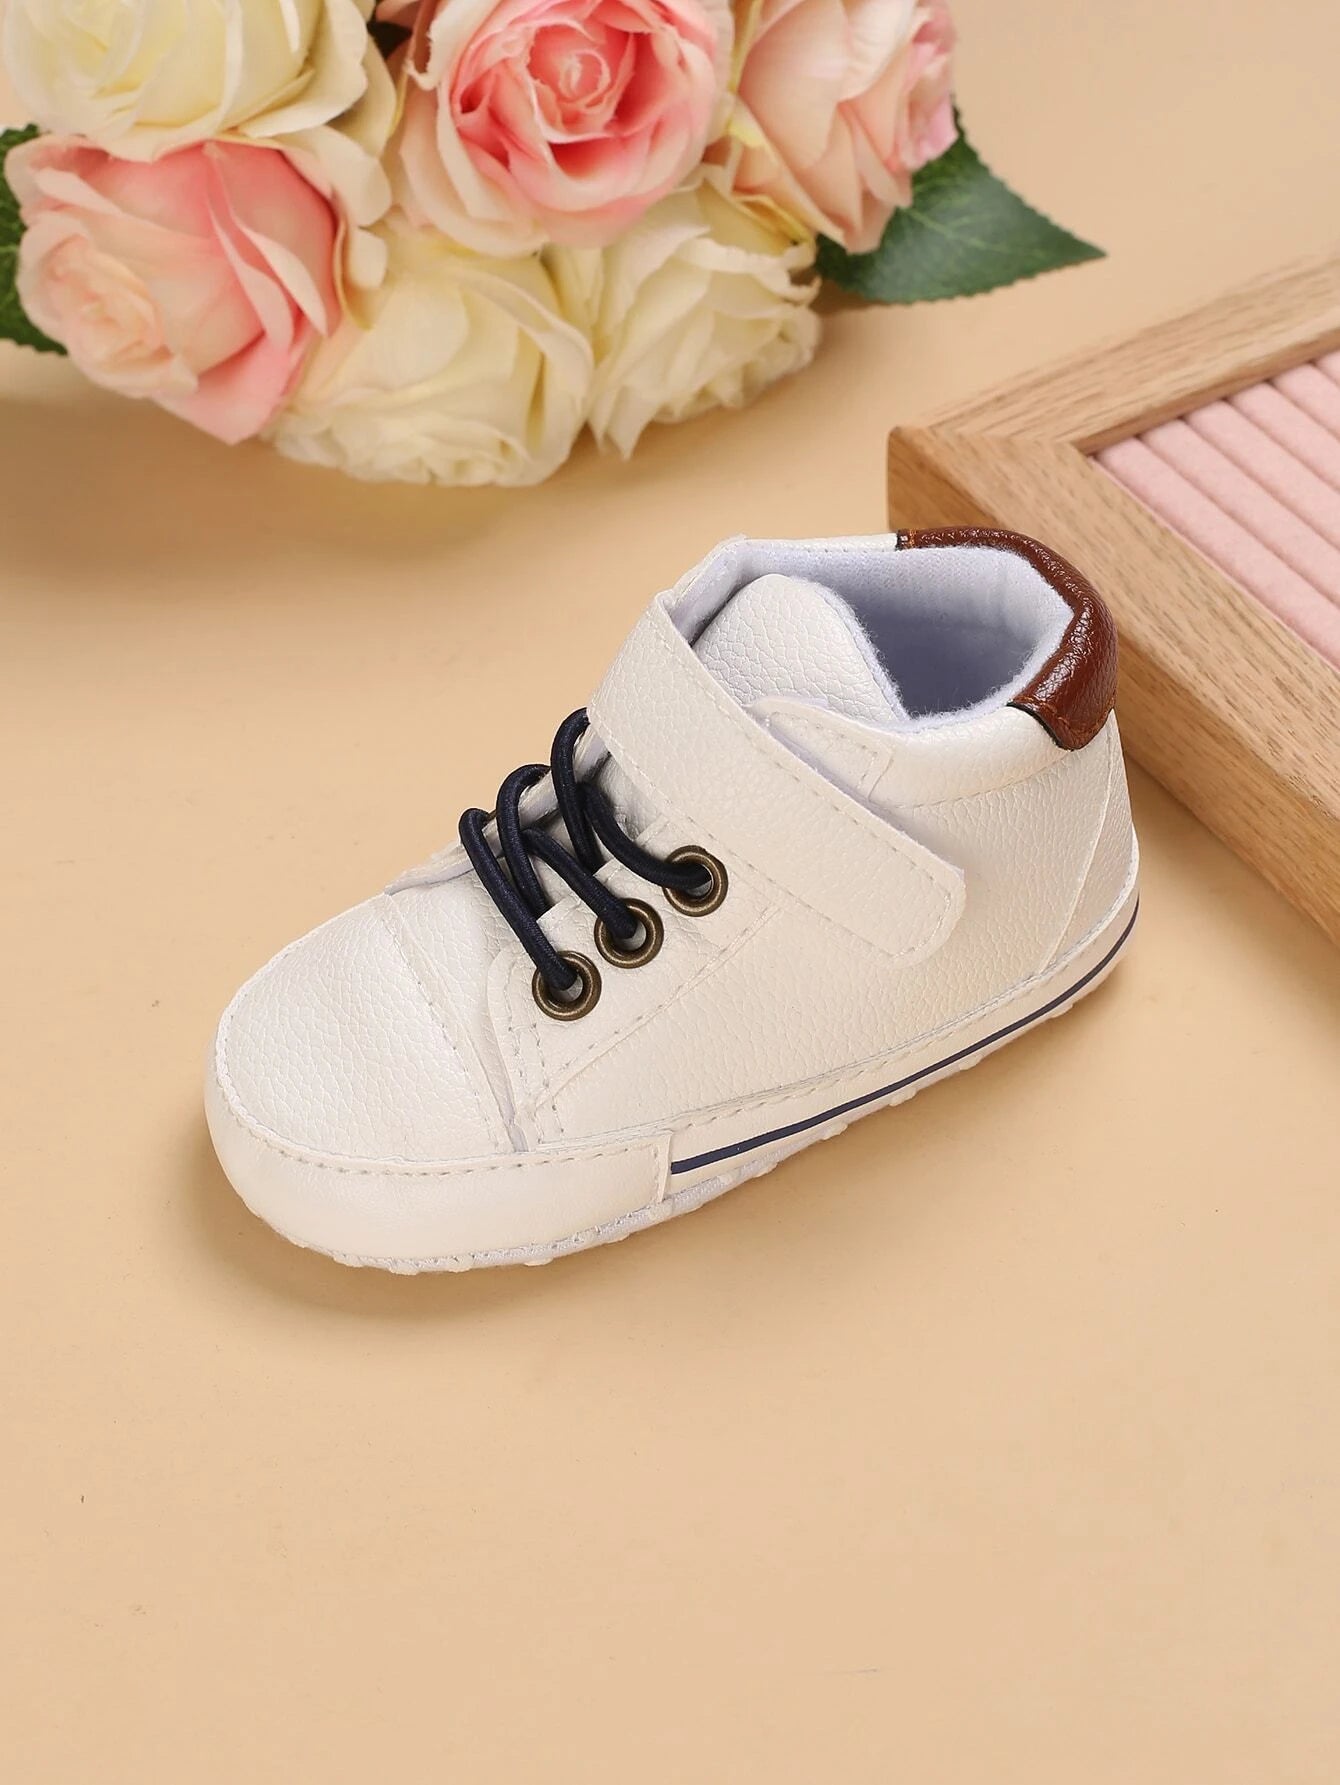 Baby Contrast Panel Hook-and-loop Fastener Boots